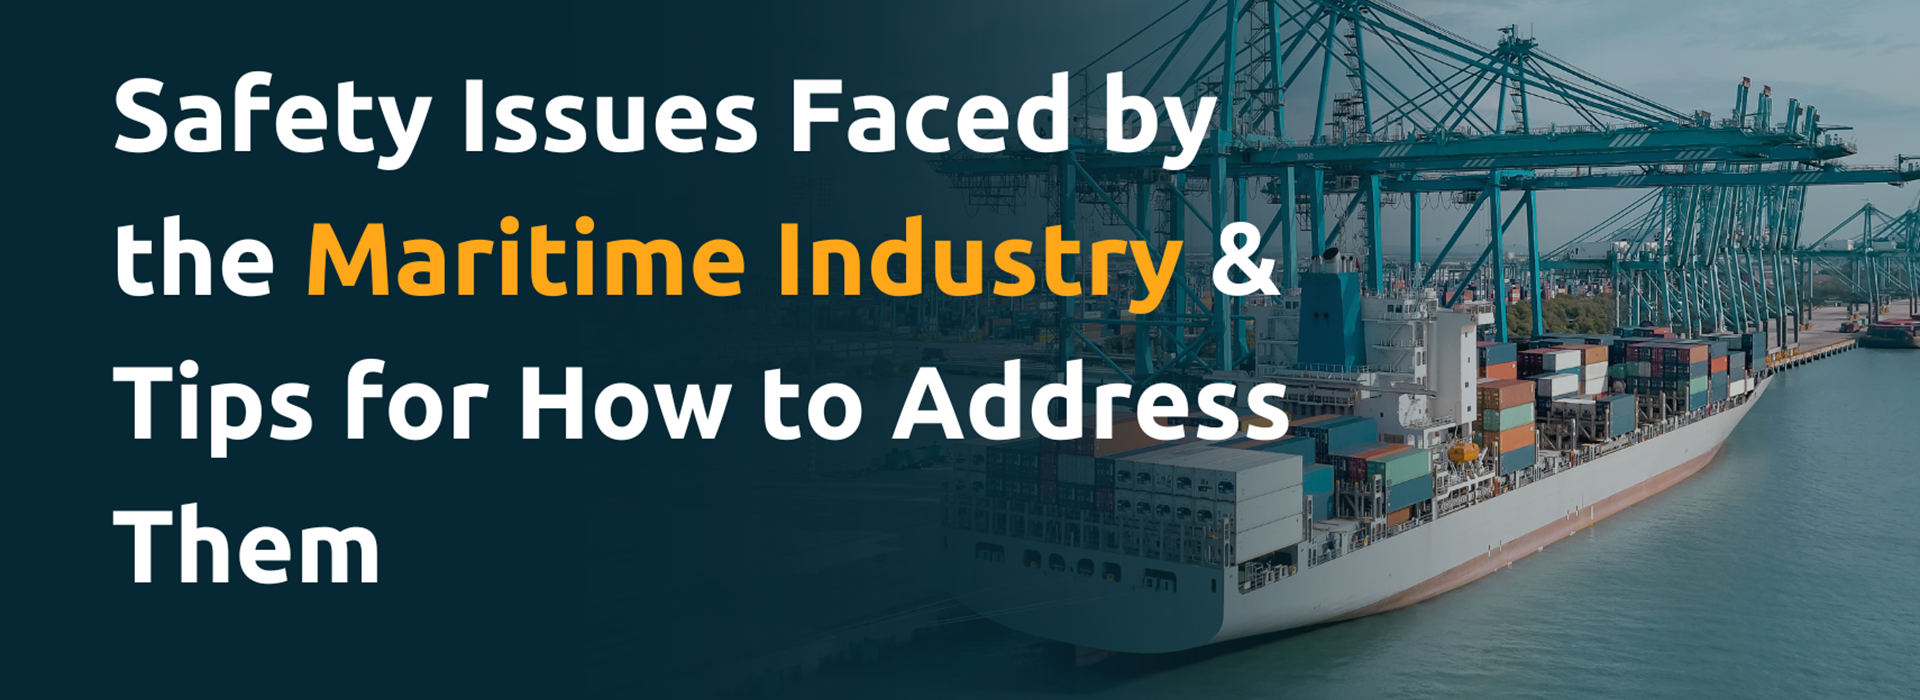 Article Thumbnail Safety Issues Faced By The Maritime Industry